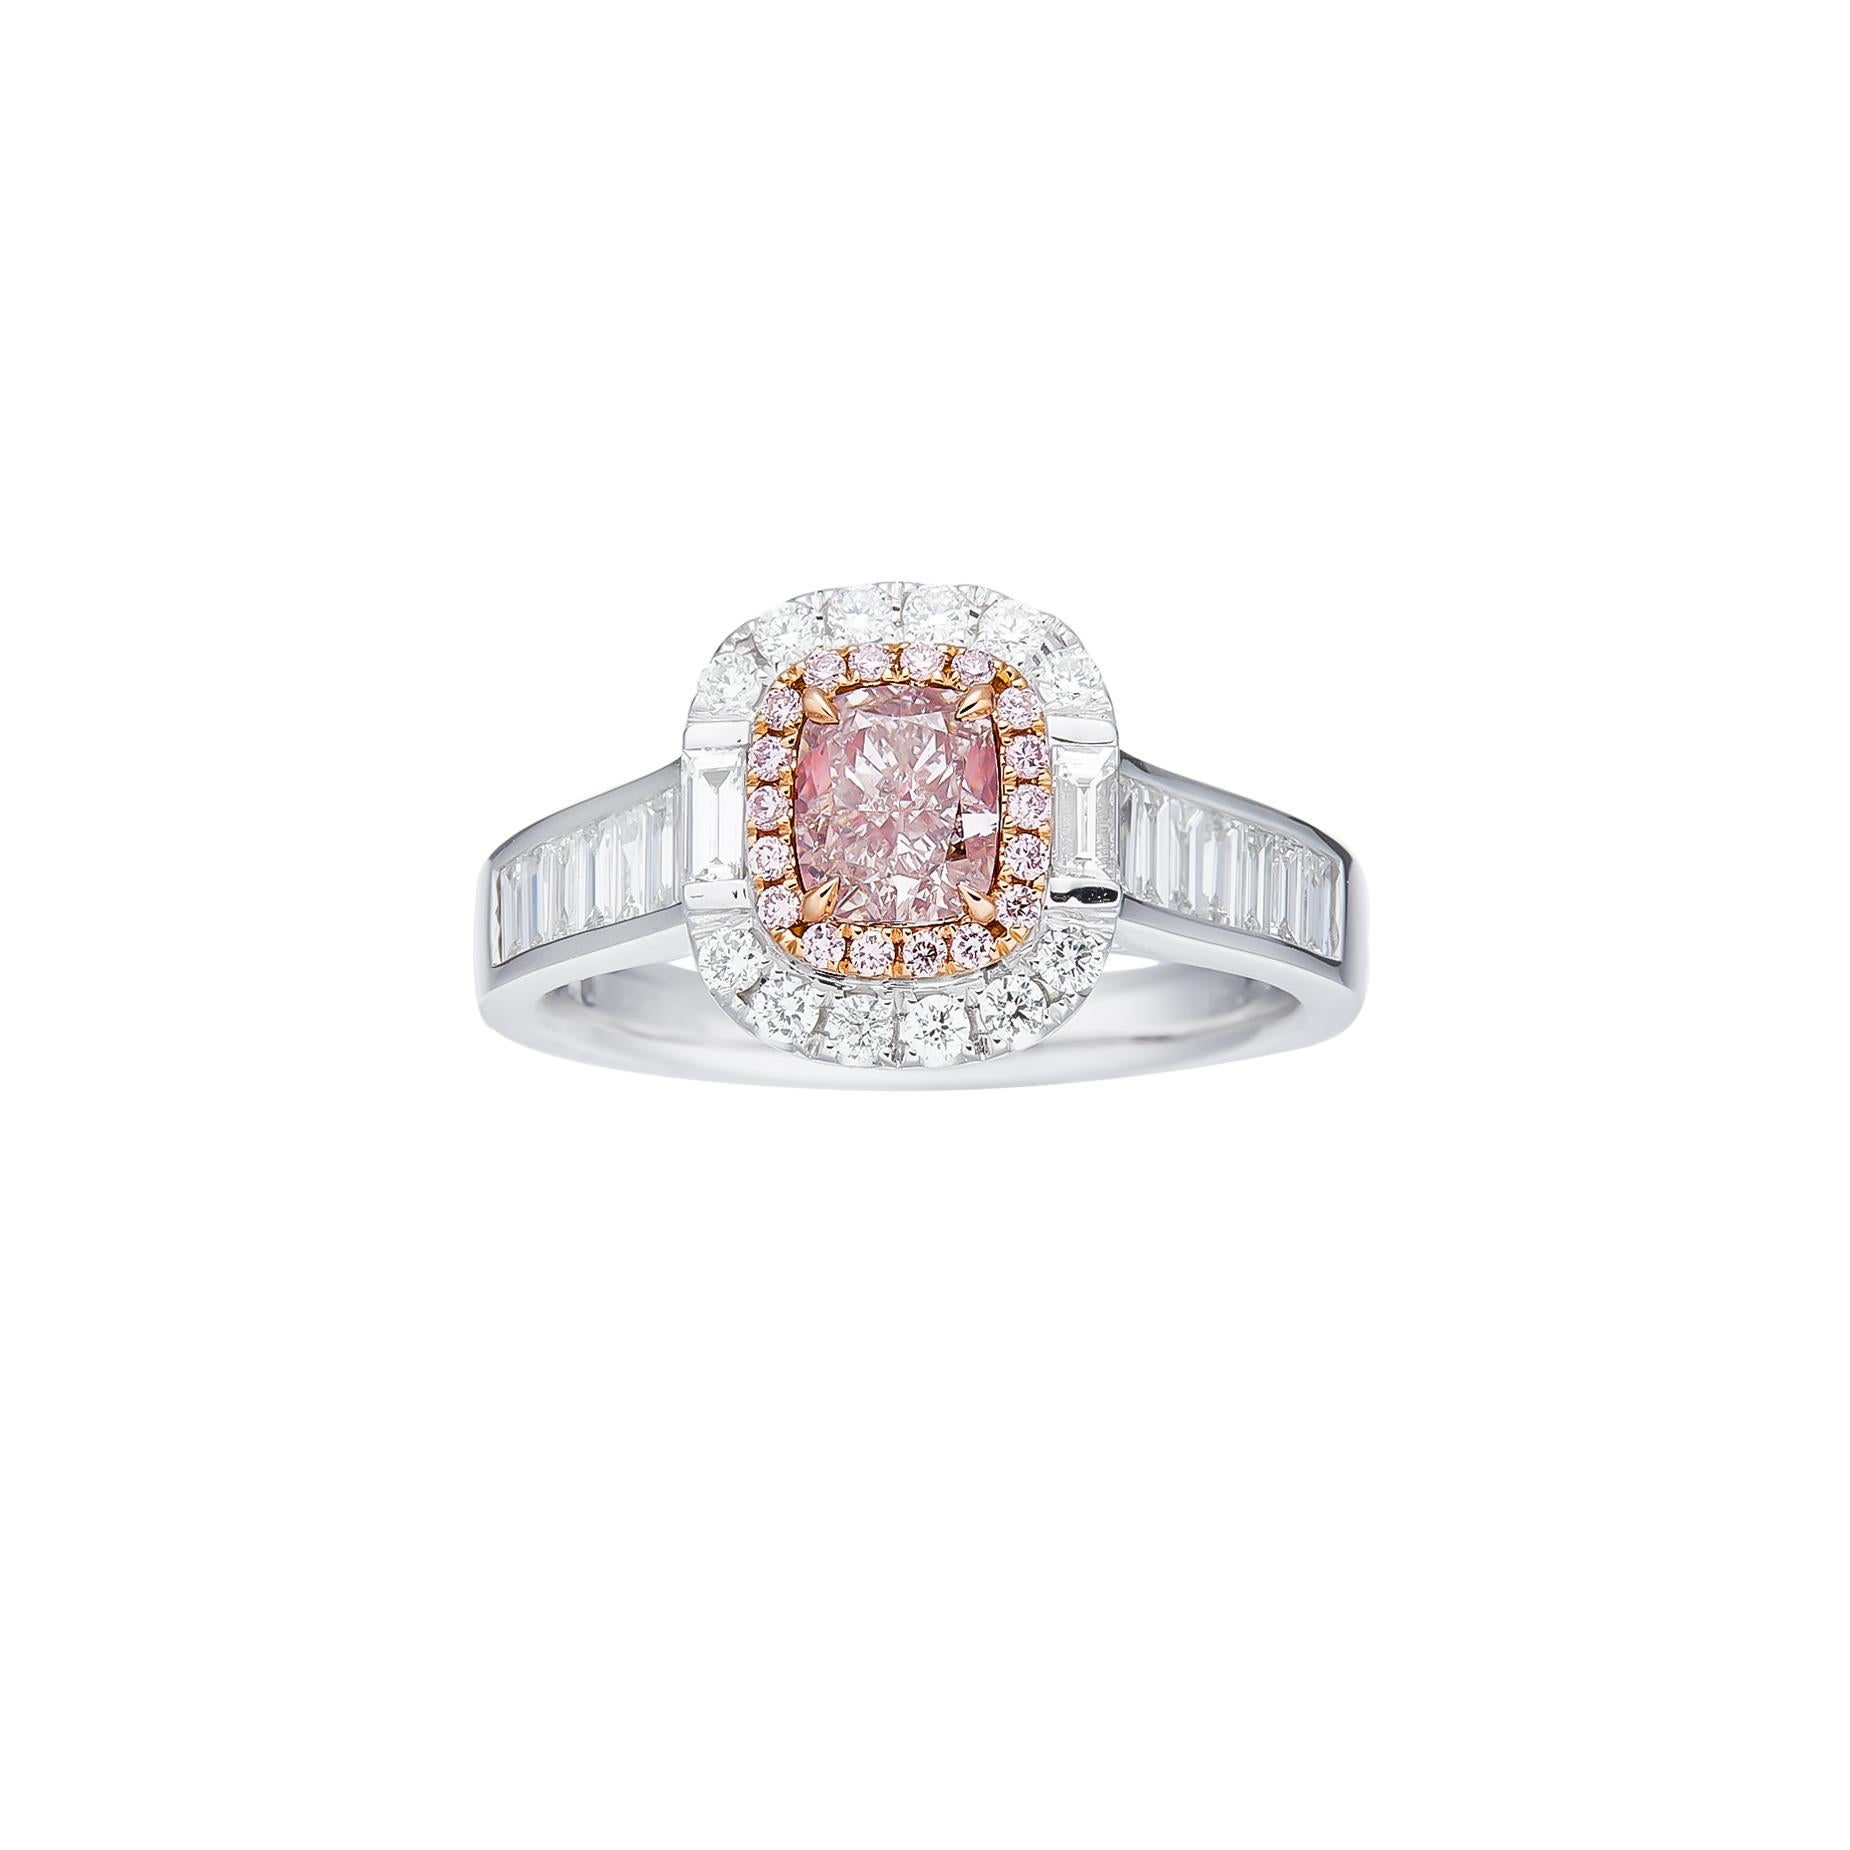 Women's GIA Certified, 0.65ct Fancy Light Pink-Brown Natural Cushion Cut Diamond Ring. For Sale